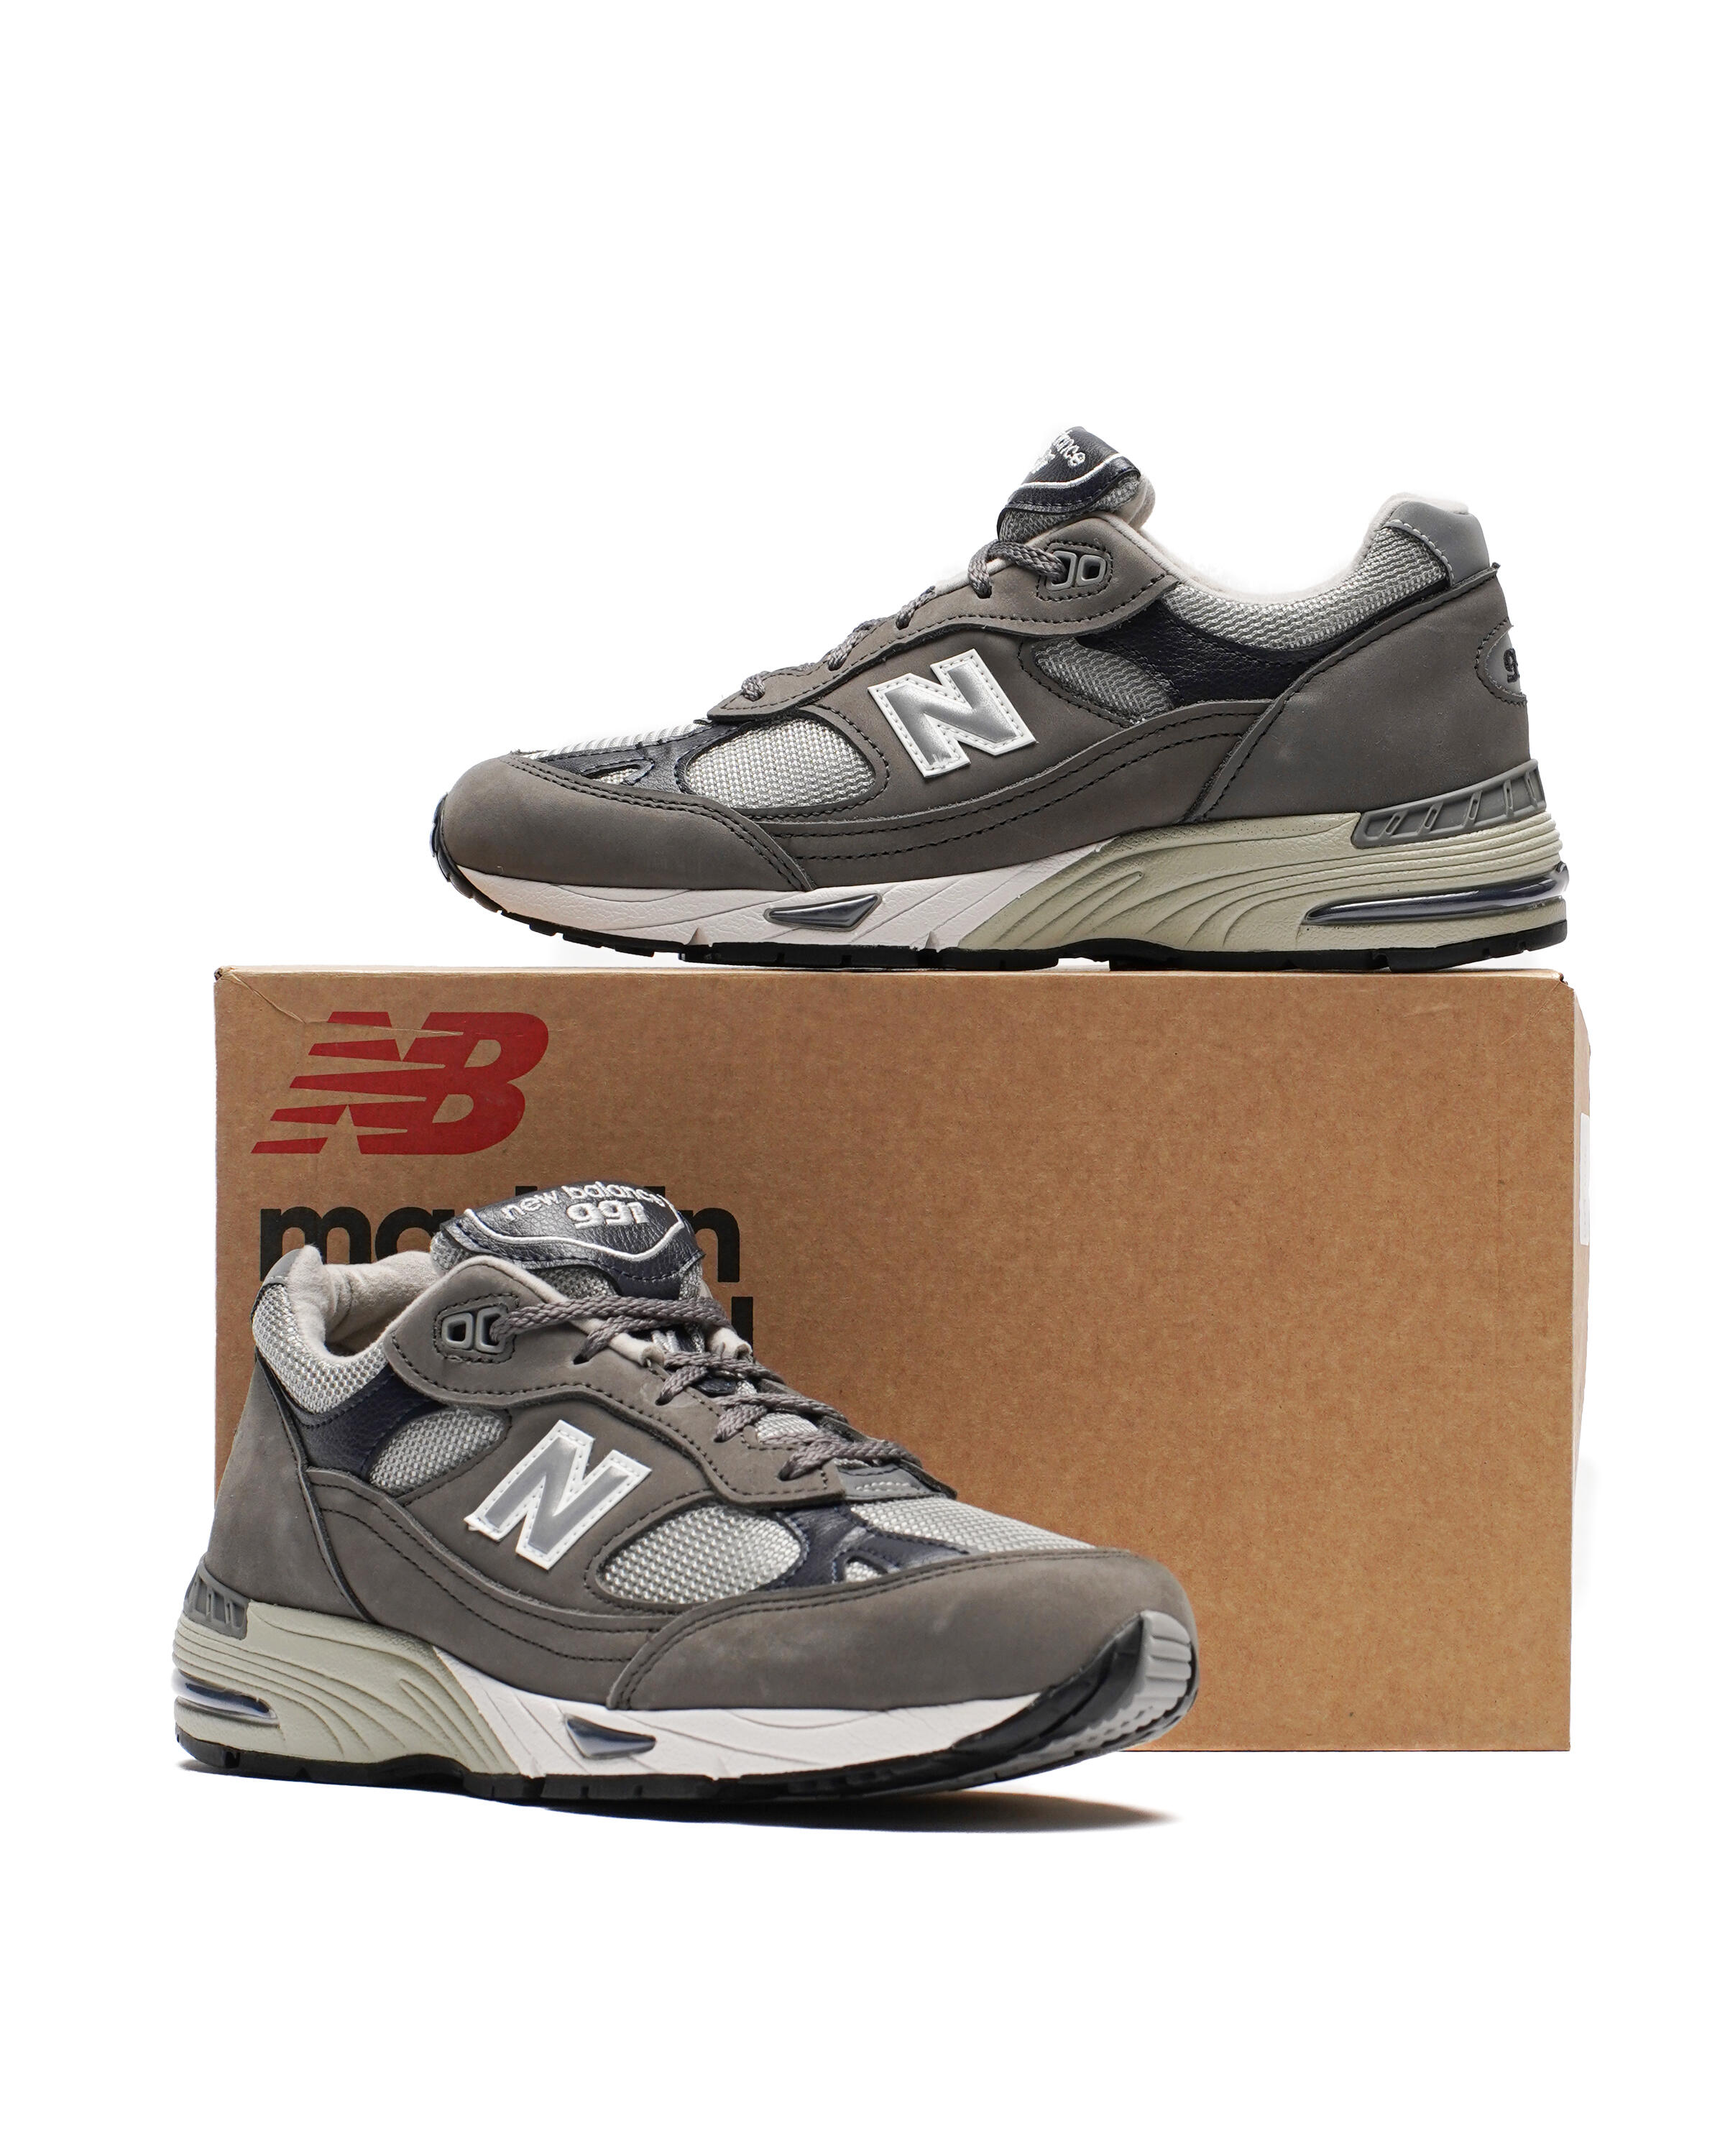 New Balance WMNS 991 GNS - Made in England